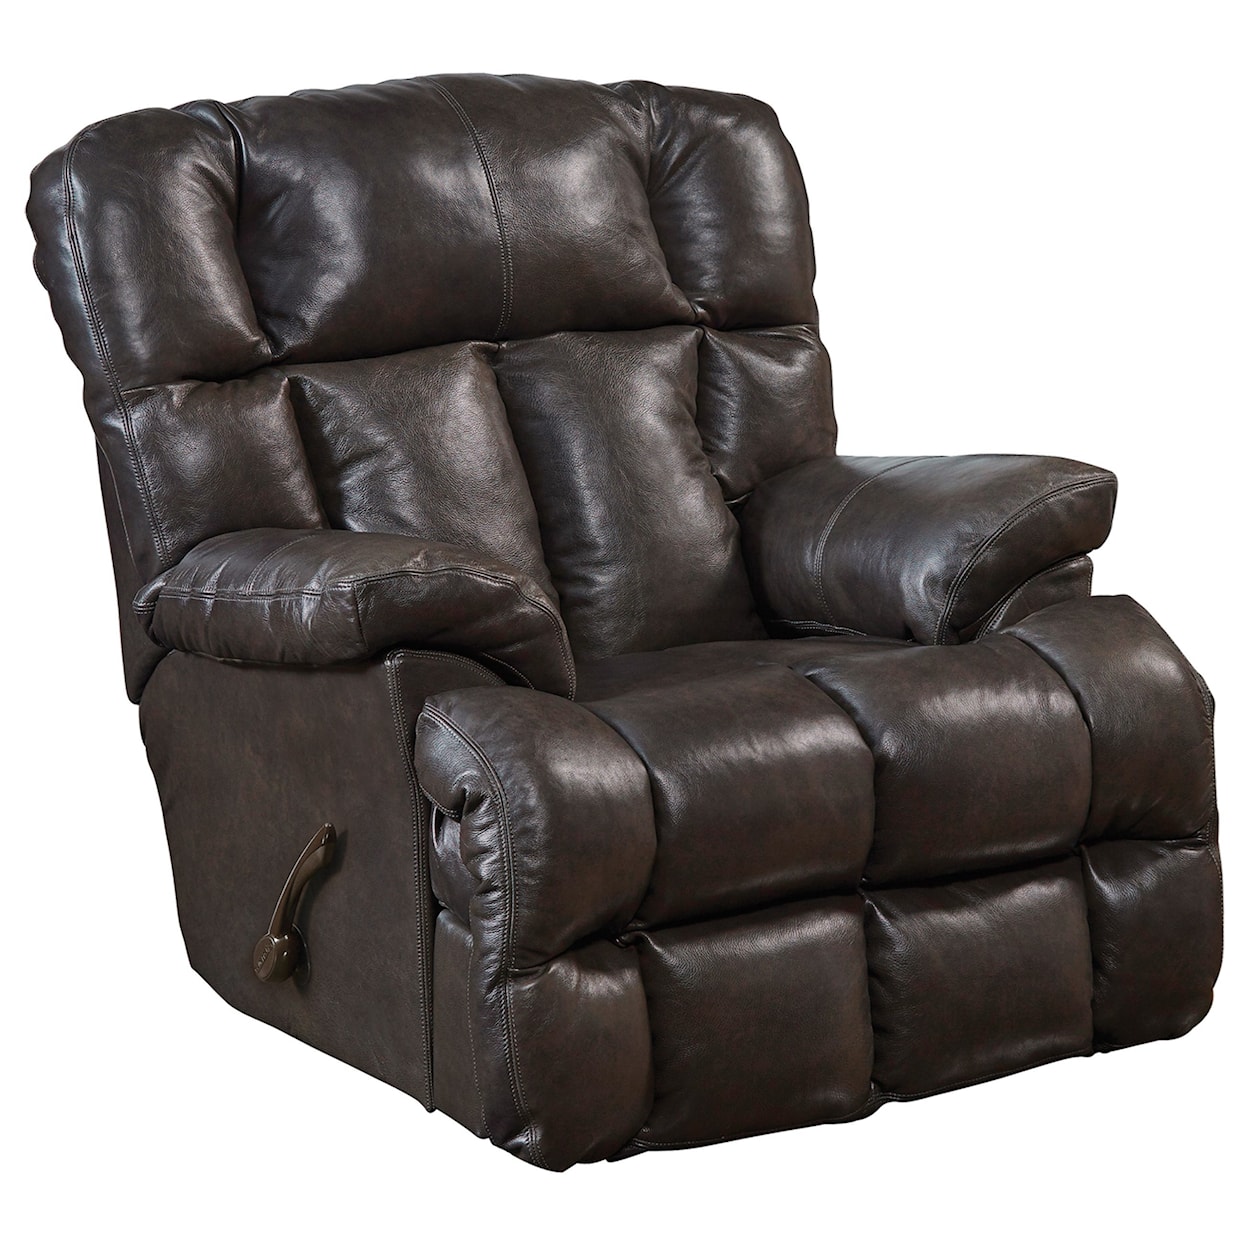 Catnapper Victor Chaise Rocker Leather Match Recliner